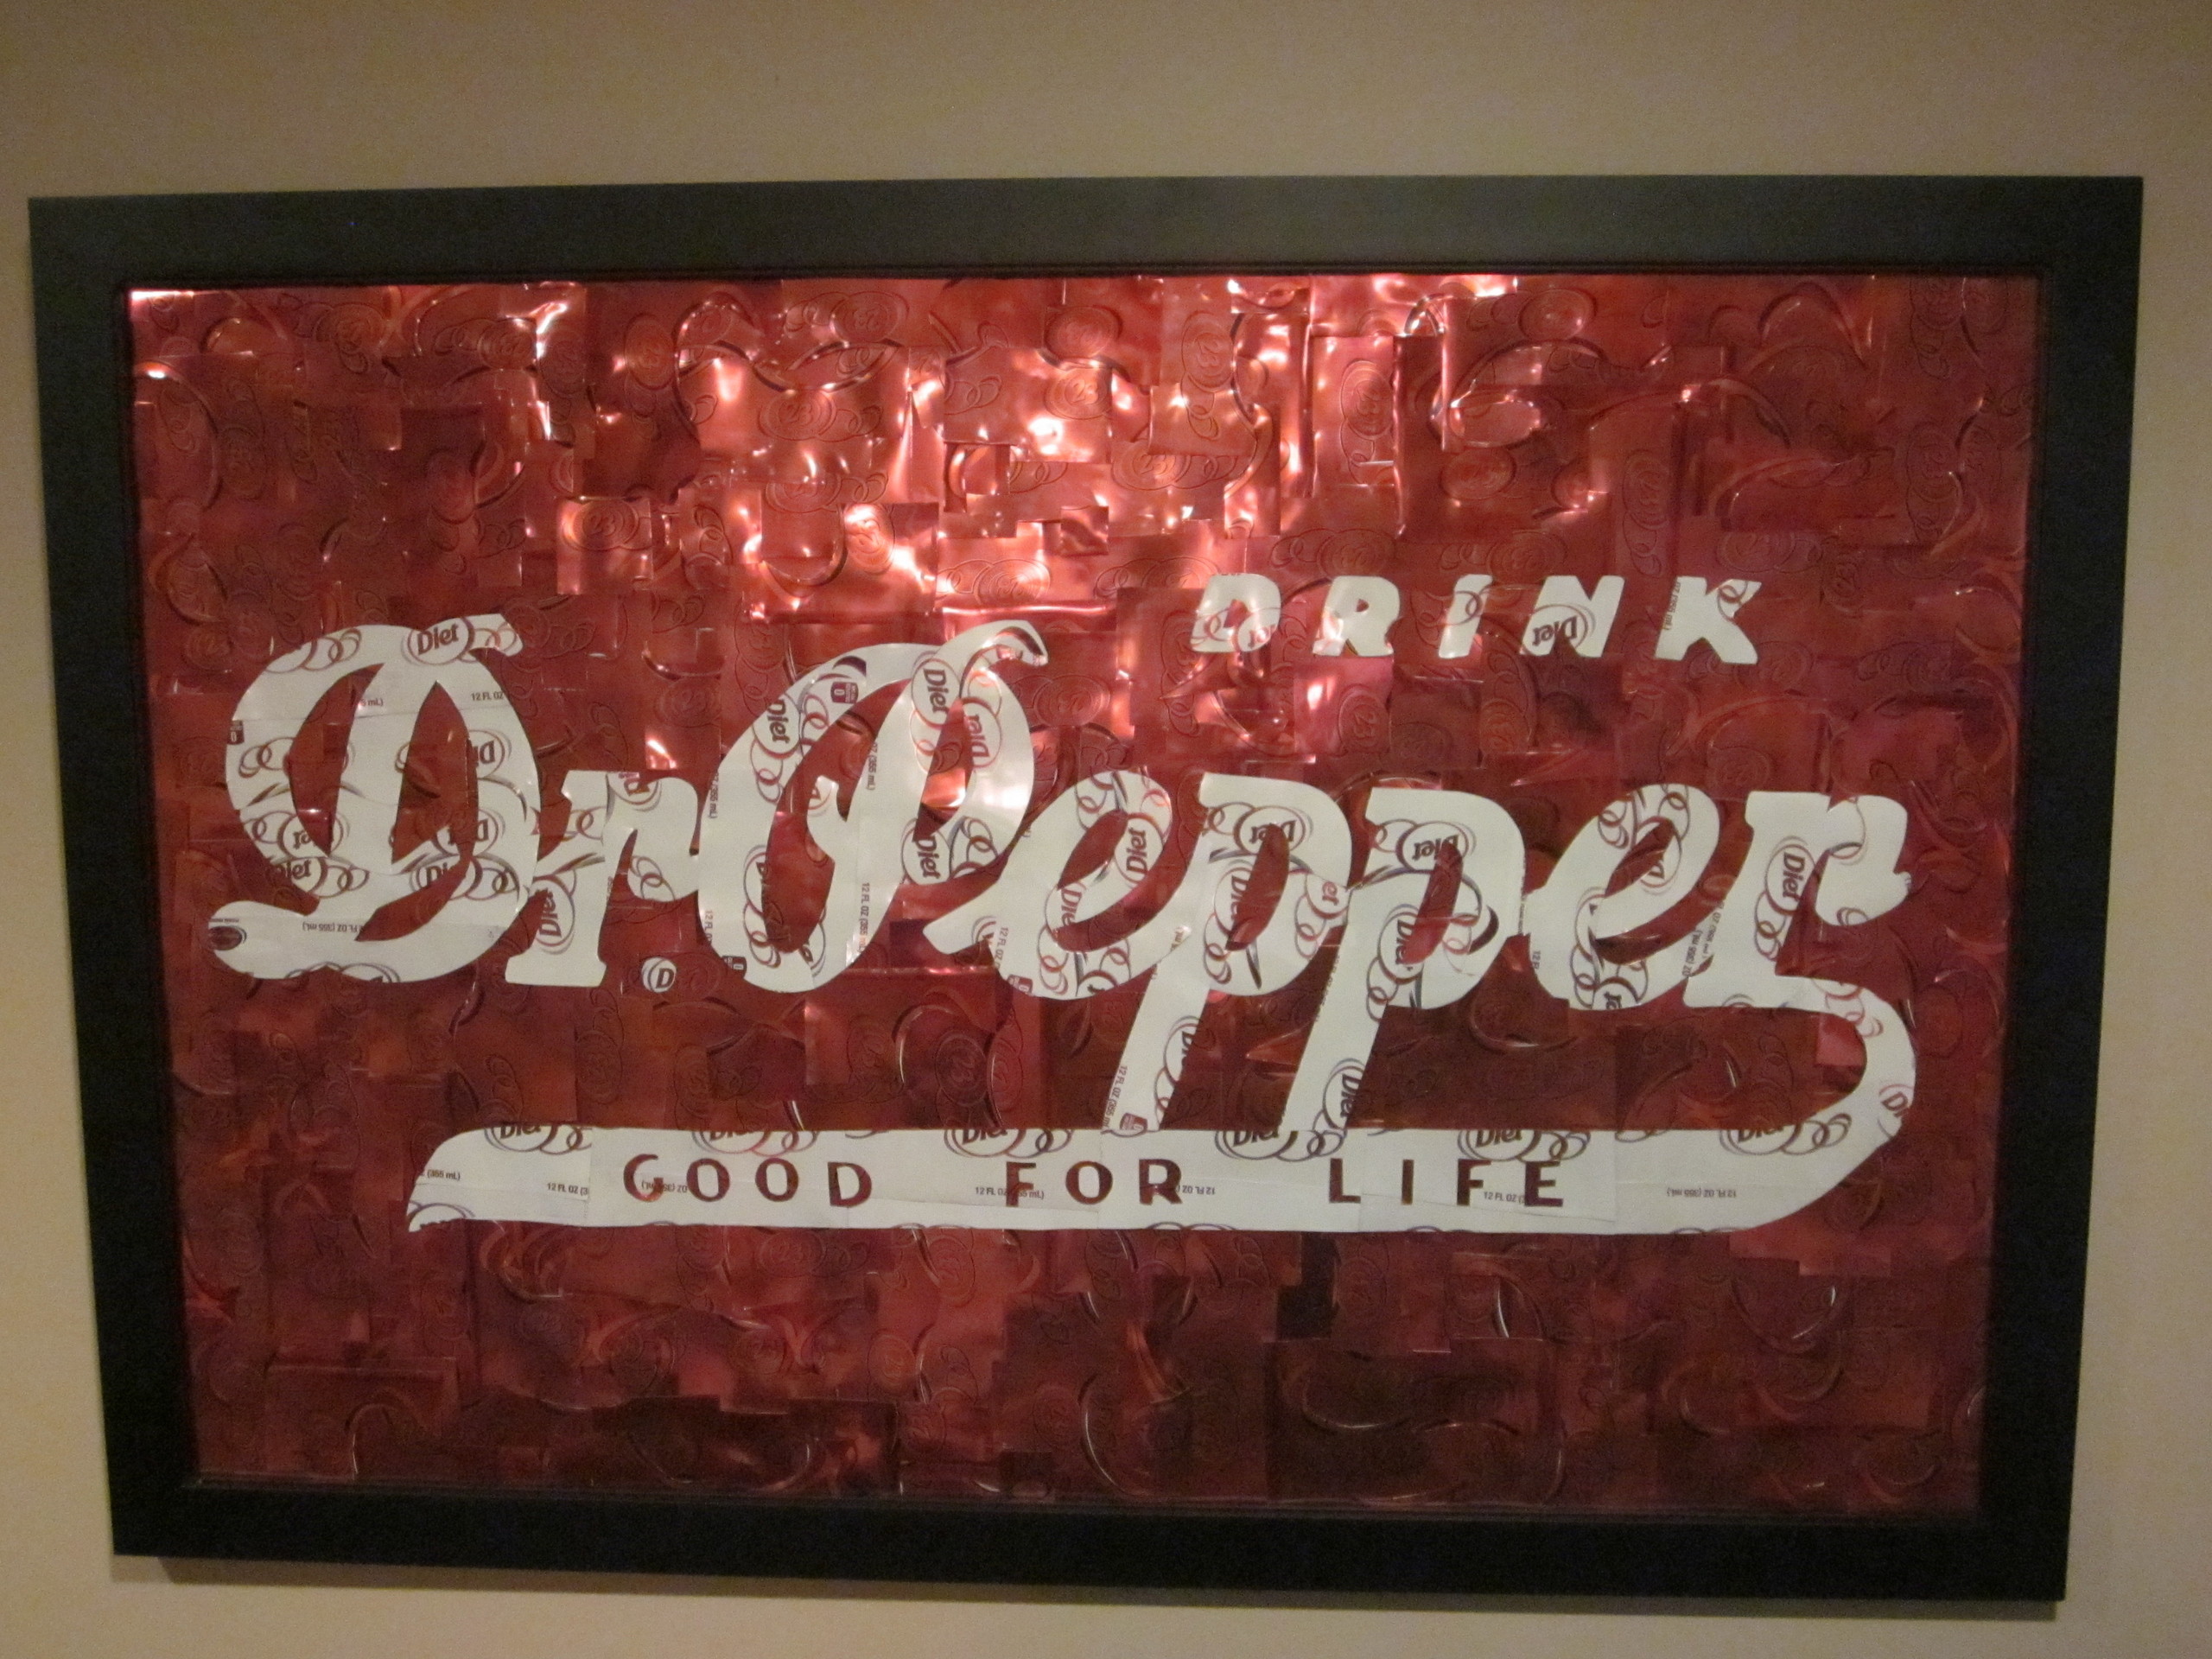 Dr Pepper Images Dr Pepper Sign Art Hd Wallpaper And Background Photos 2560x1920